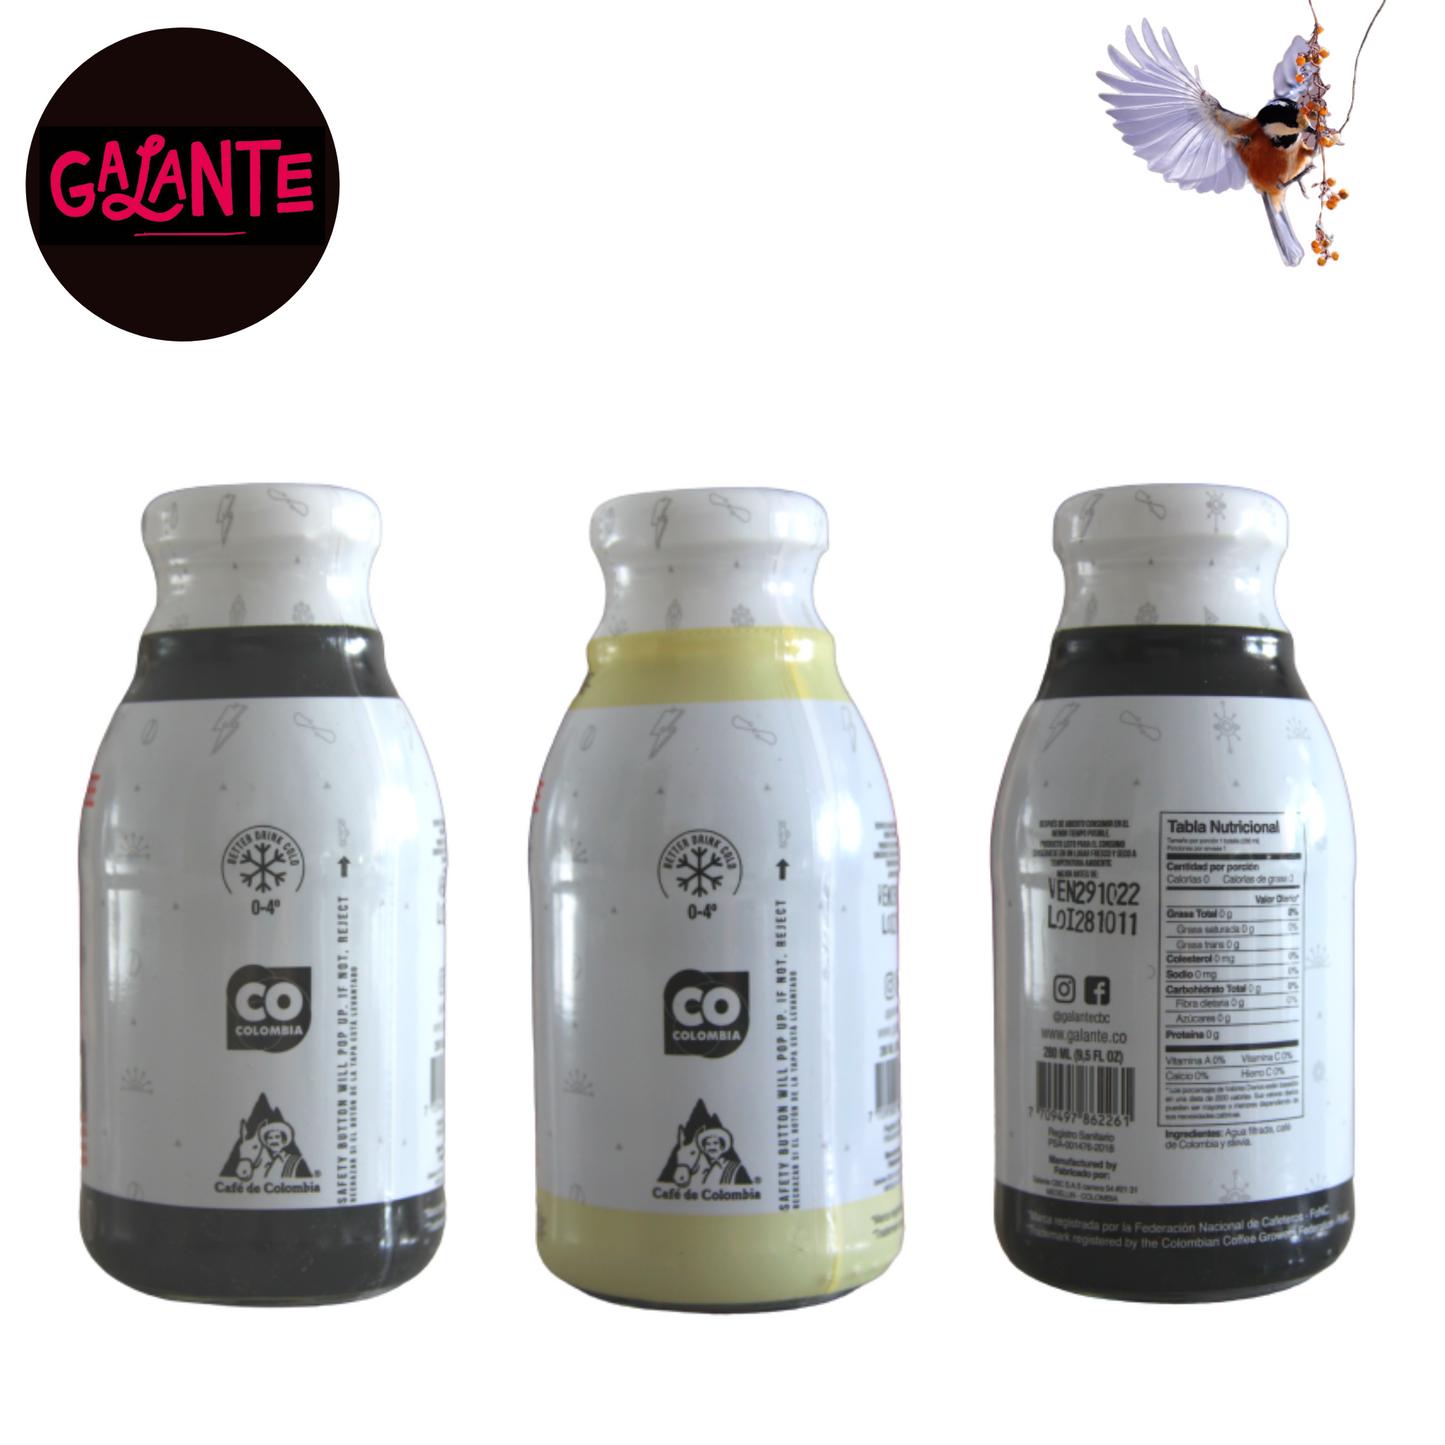 Galante Cold Brew Assorted flavours - 100% Colombian Coffee. Buy it here at Coffee Bean and Birds